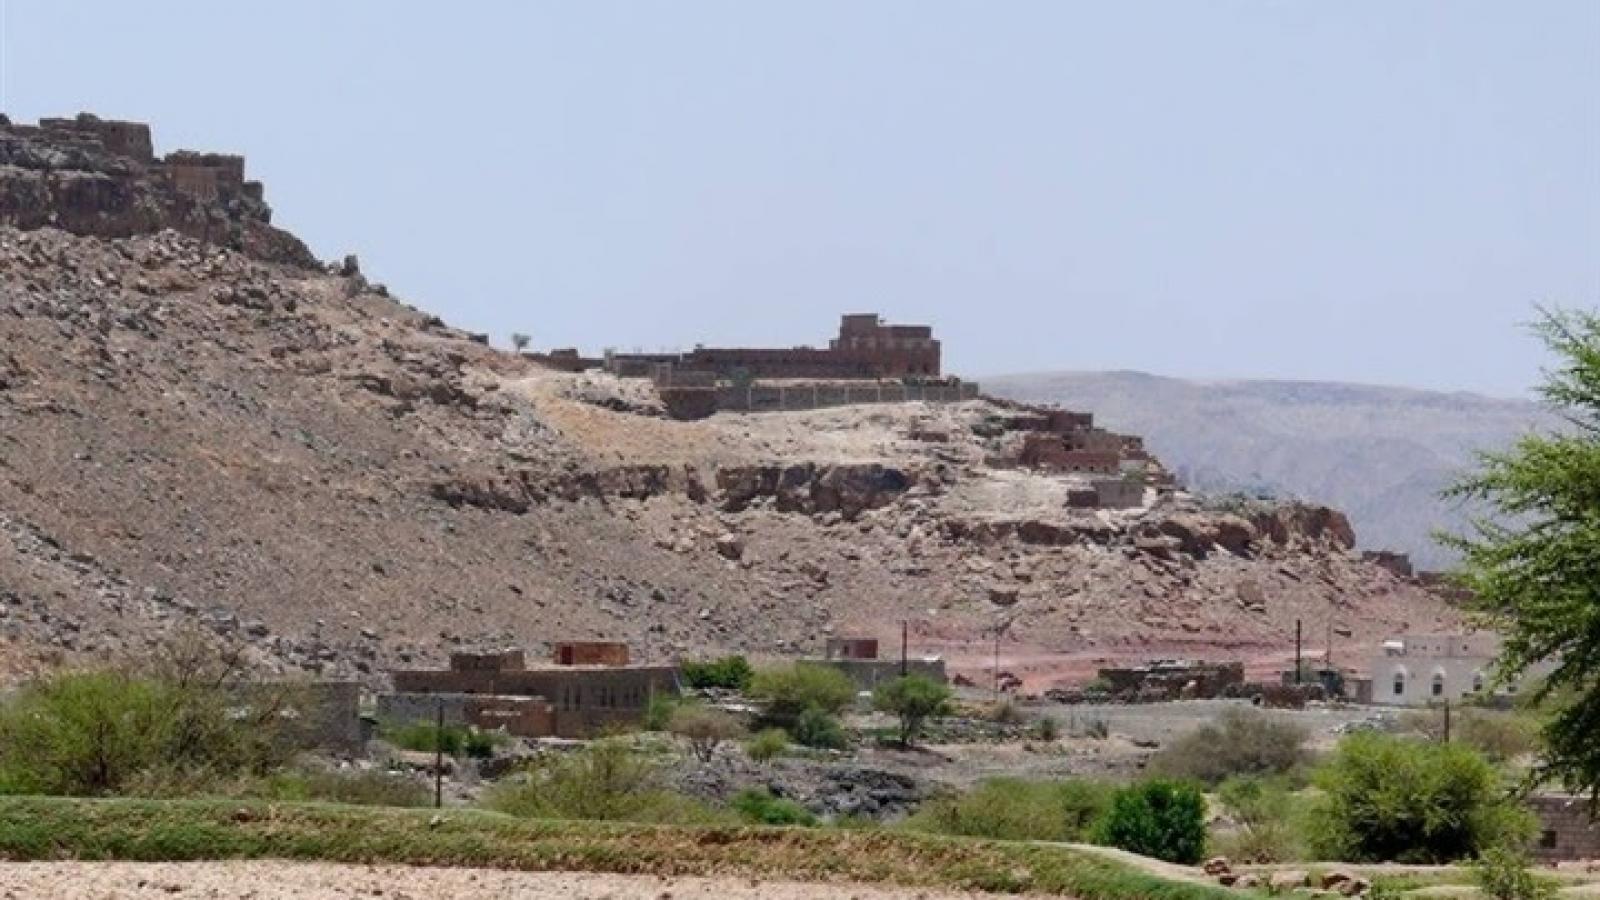 Archaeological site of the mountain where ancient city of Baynun was built, and which hosts the Baynun Museum, Arab Yemen Website, 6 February 2019